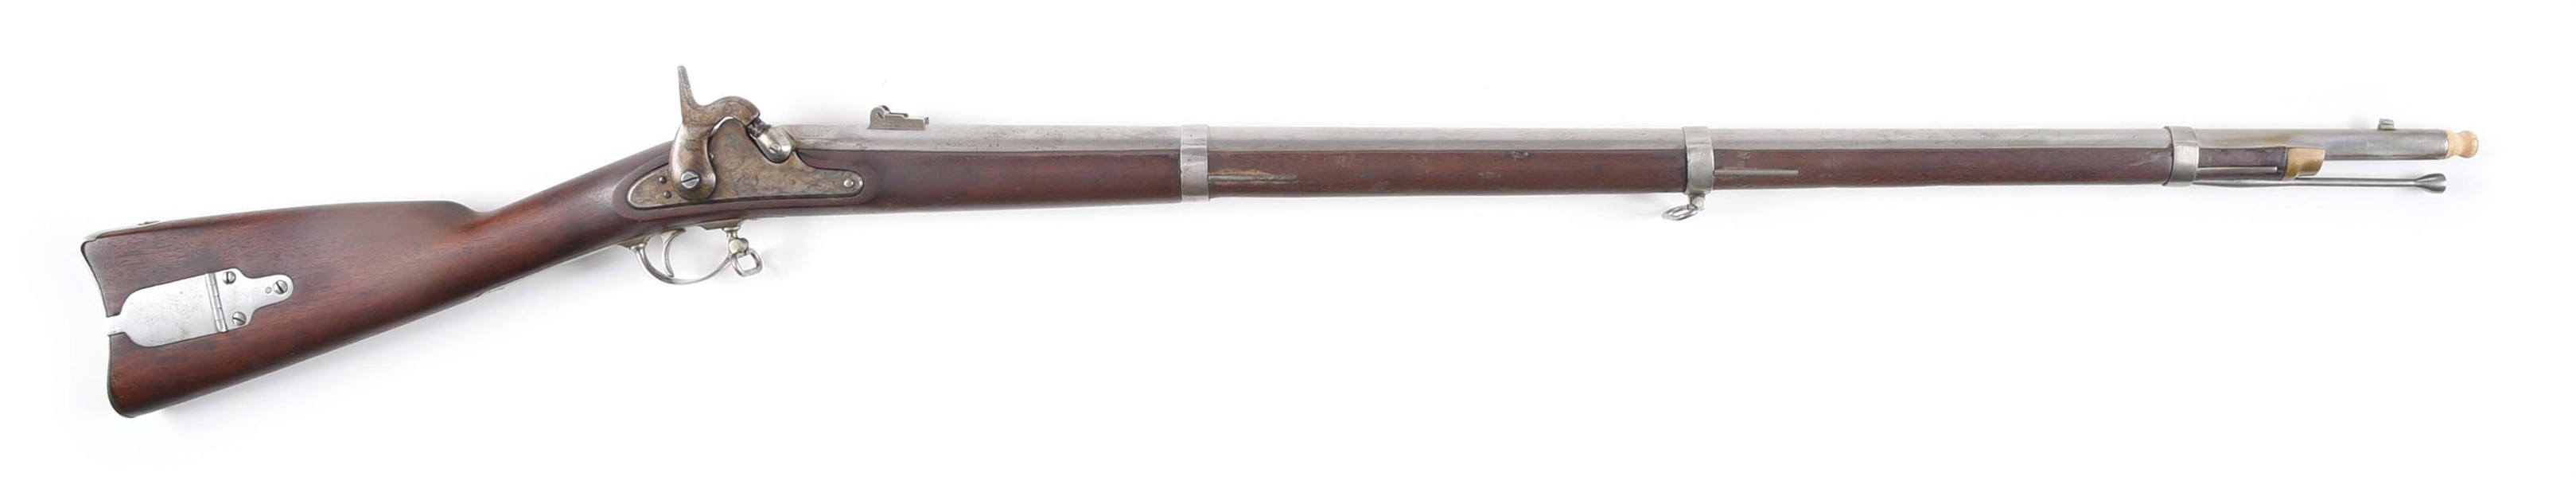 (A) WELL CONSTRUCTED REPRODUCTION OF A CONFEDERATE C.S. RICHMOND MUSKET.